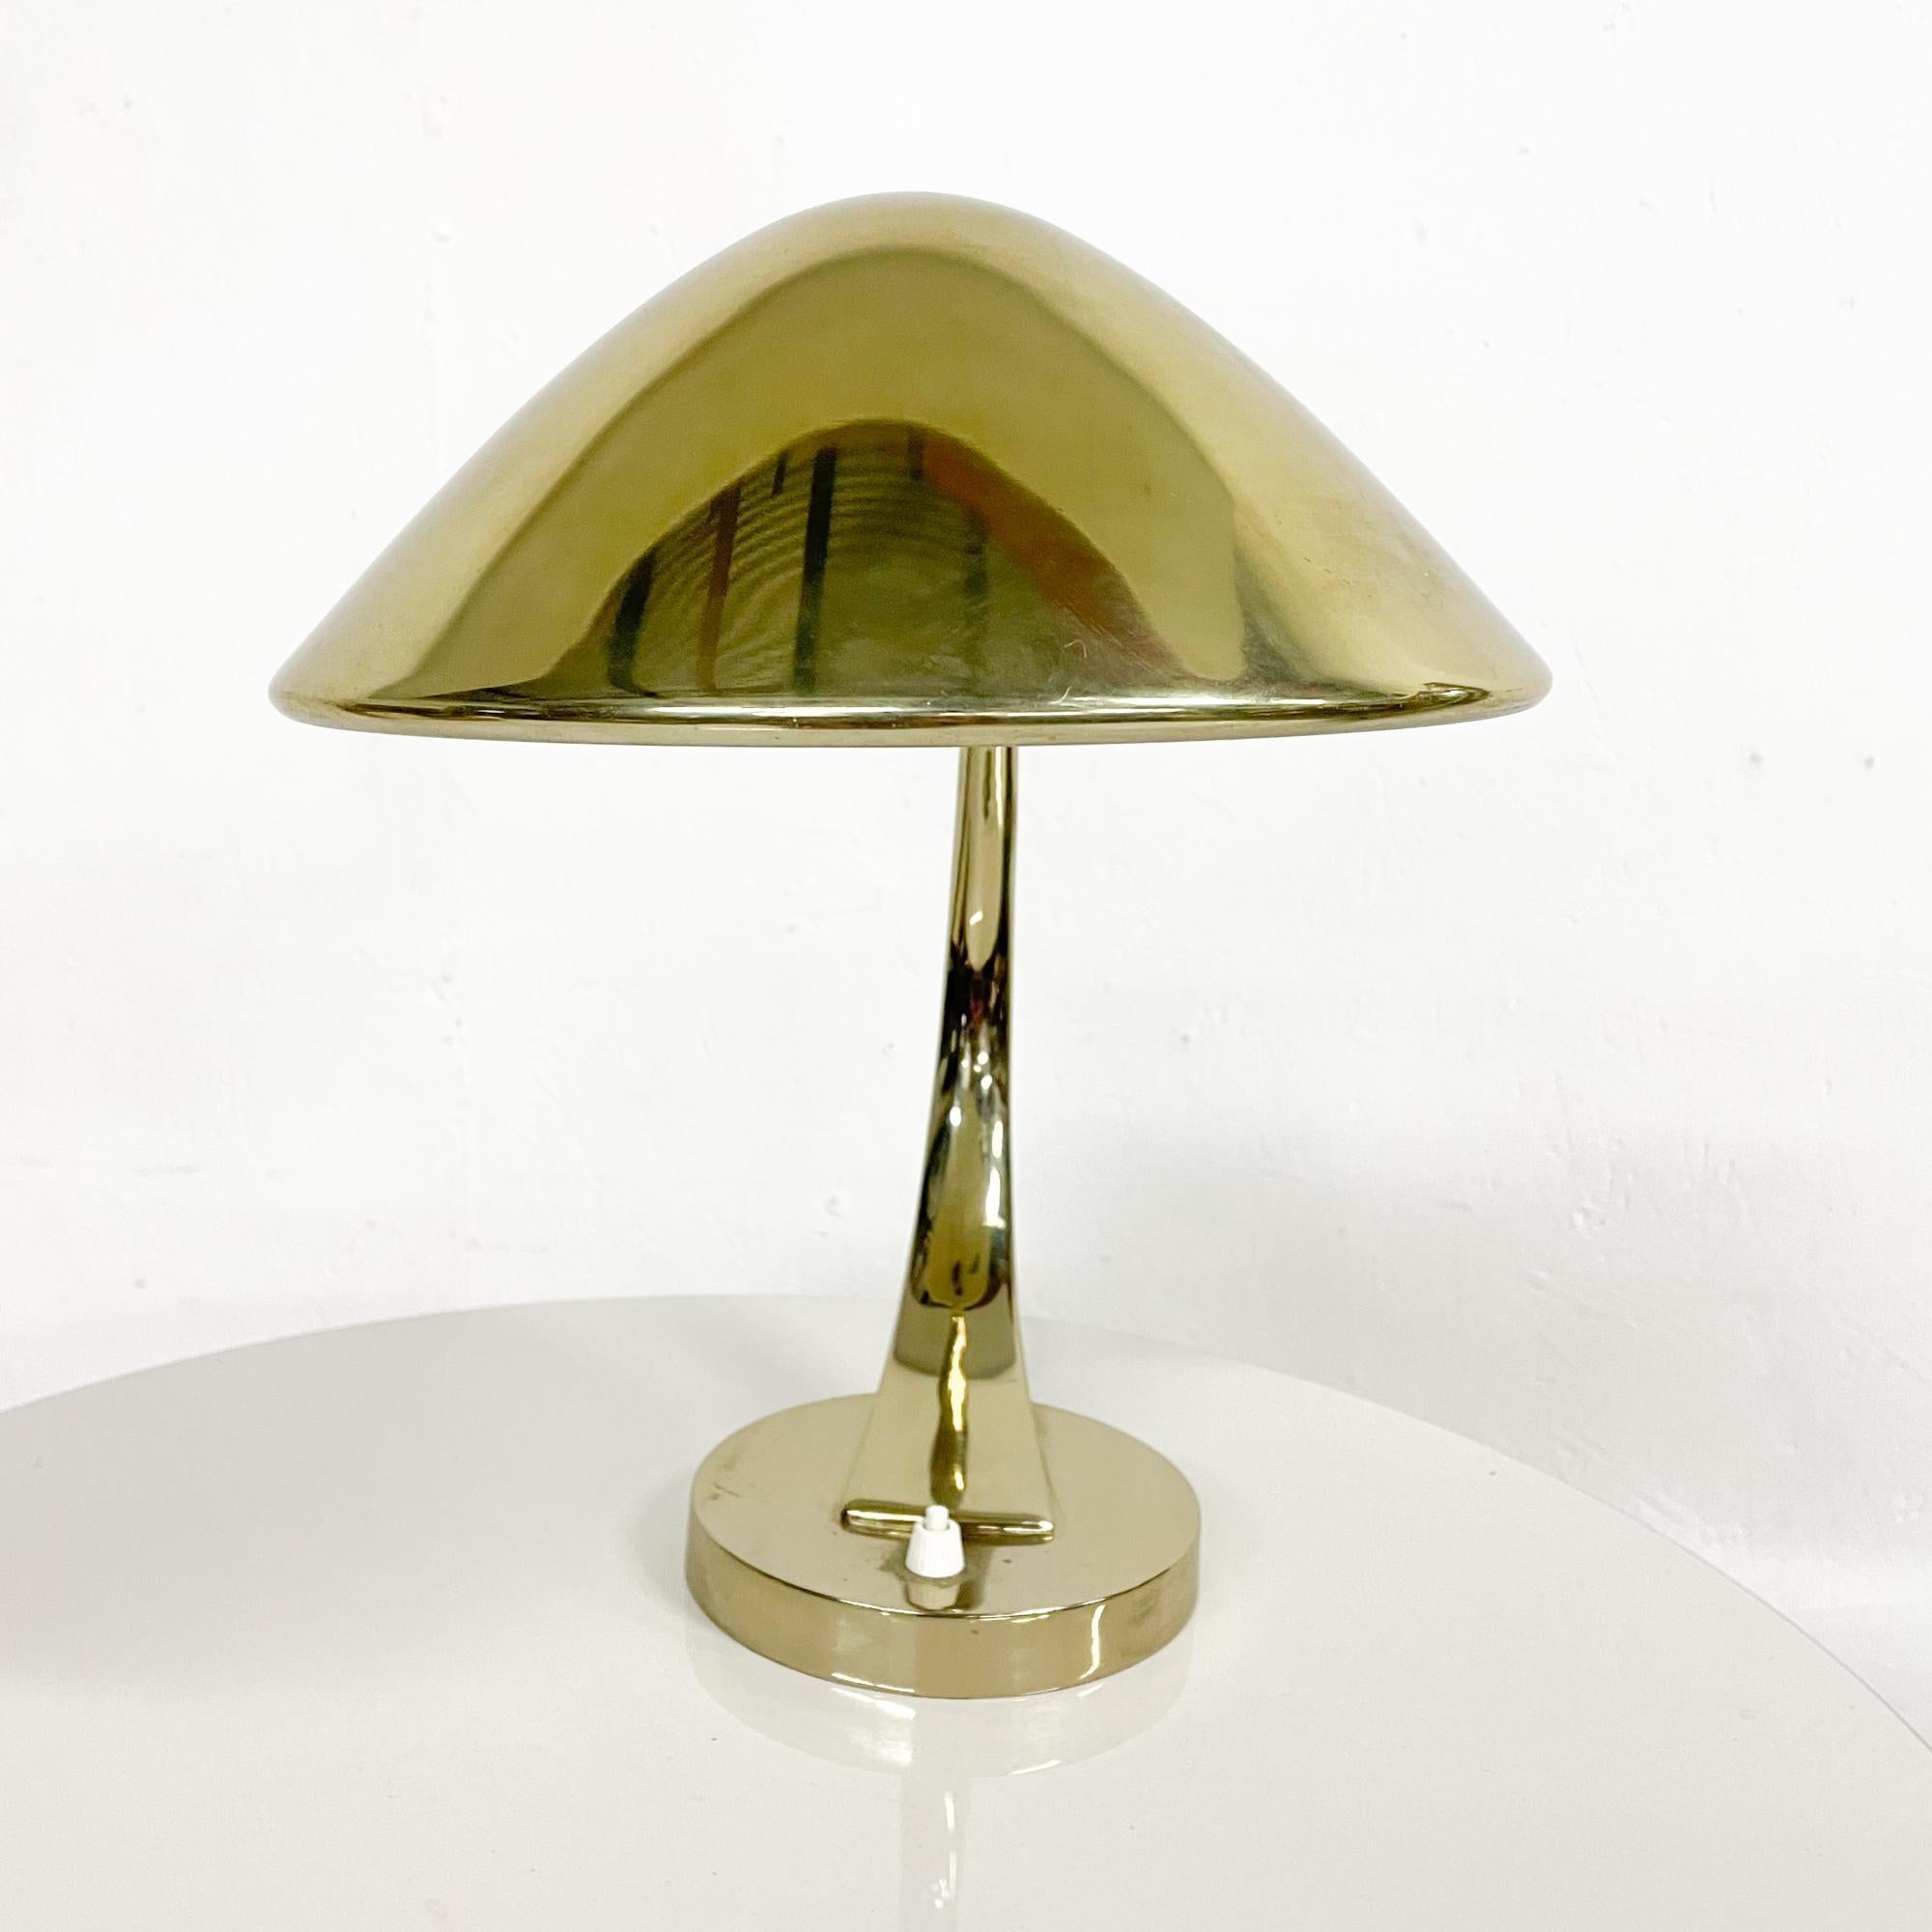 Desk Lamp
Sculptural Laurel Desk Table Mid Century Modern.
Made in the USA. Circa the 1960s. Brass Plated finish
New turn on and off switch. 
Tested, in working condition. 
Very good original unrestored condition. Expect vintage wear 
Refer to